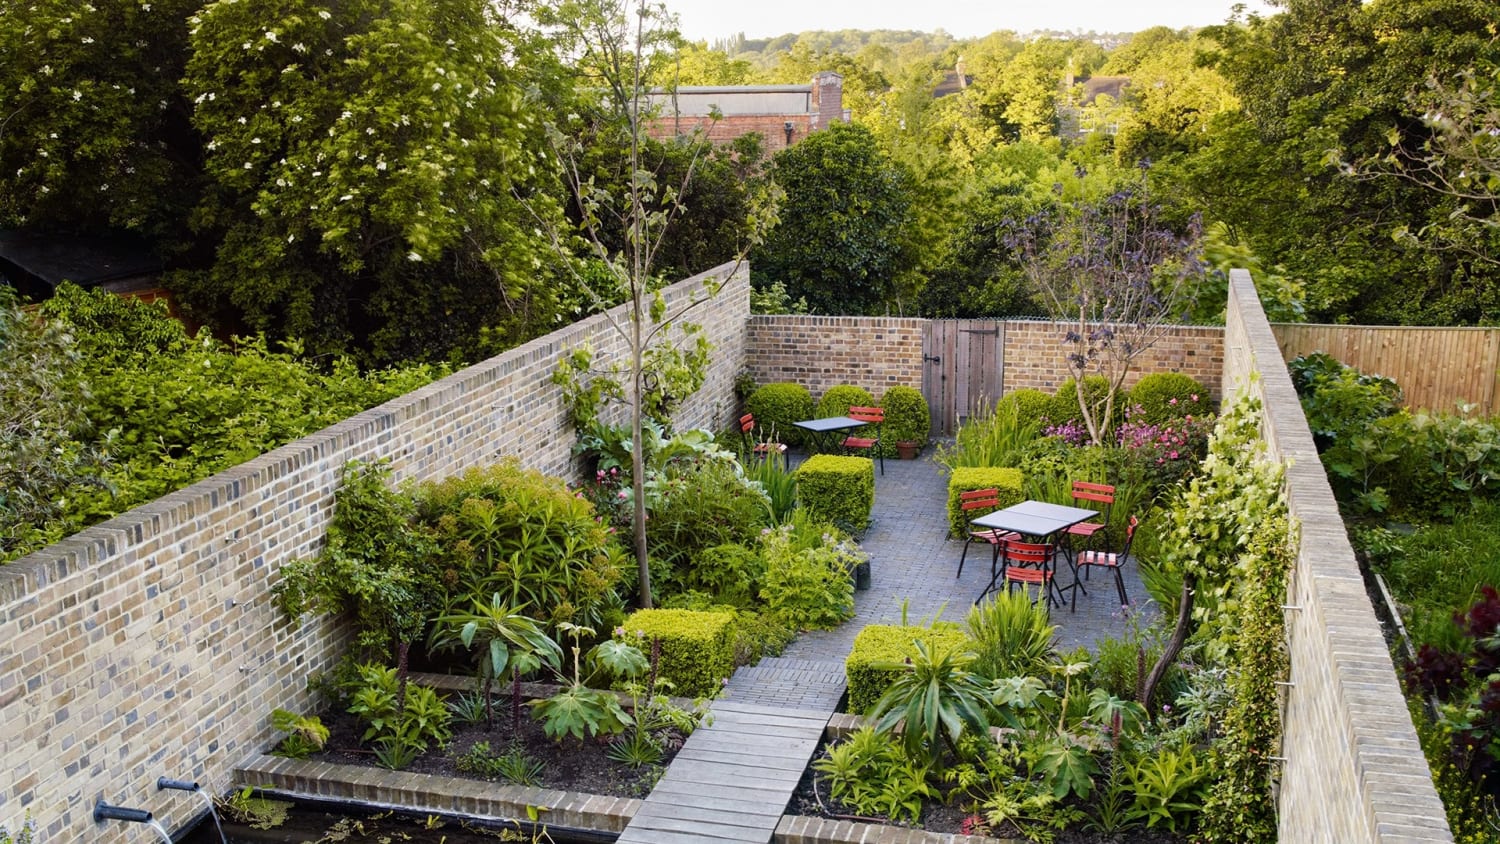 Jinny Blom's compact London garden is a verdant haven without a blade of grass in sight